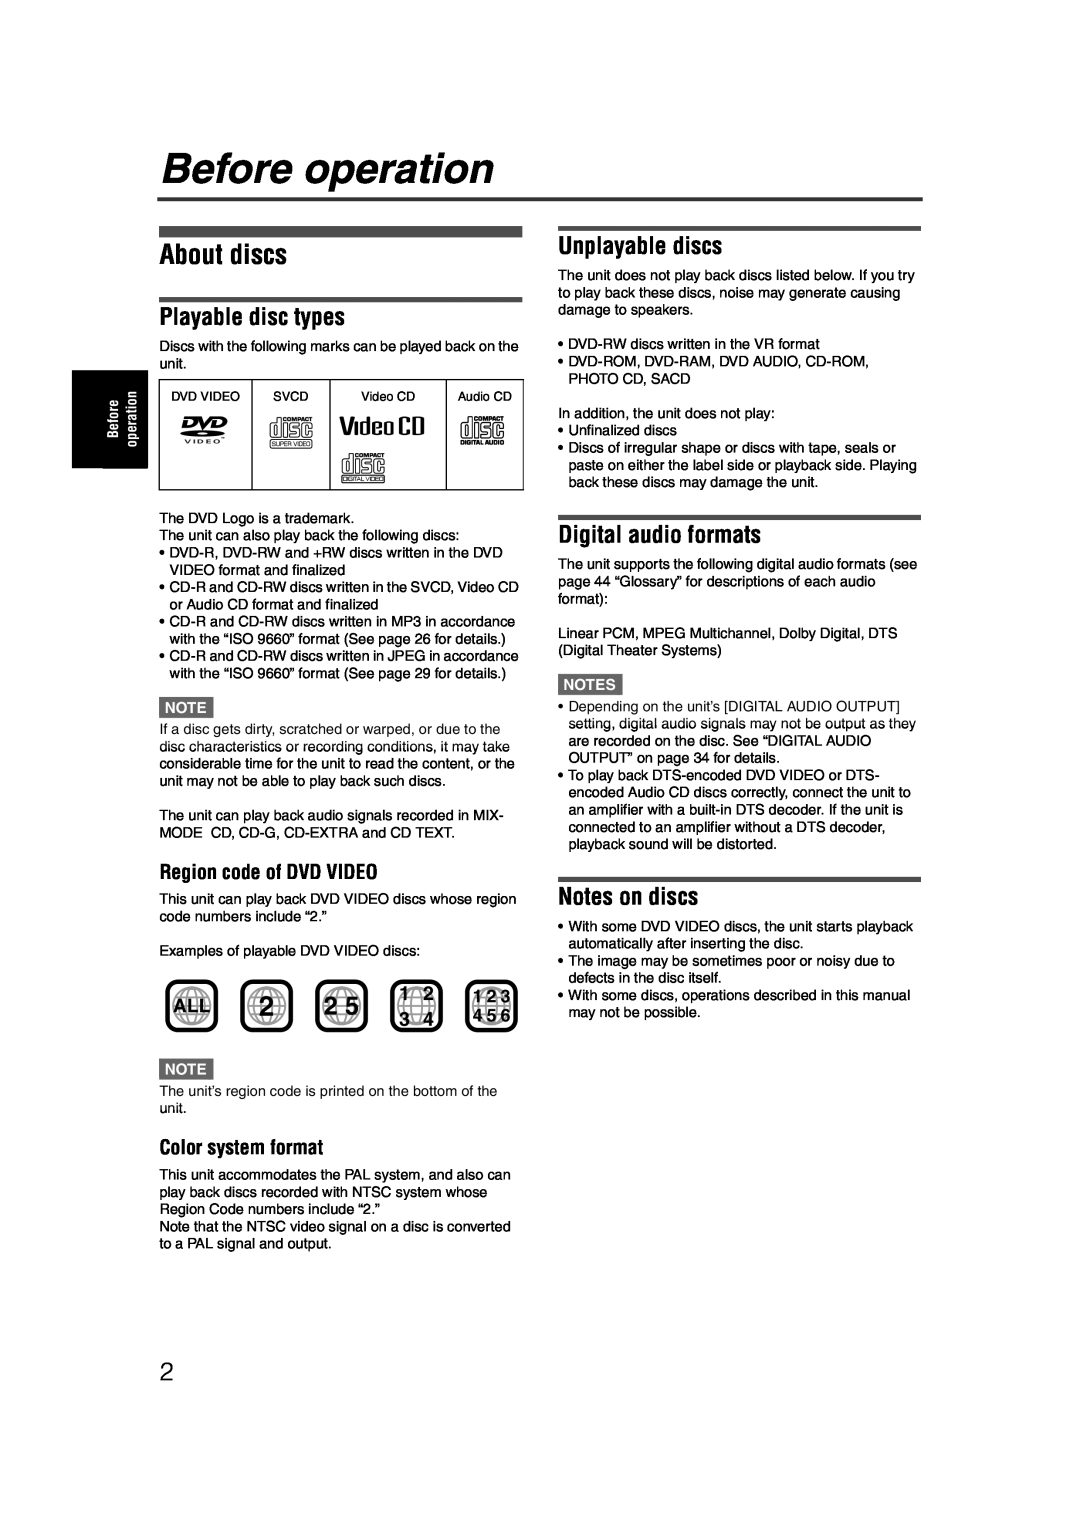 JVC LET0227-003A manual Before operation, About discs, Playable disc types, Unplayable discs, Digital audio formats 